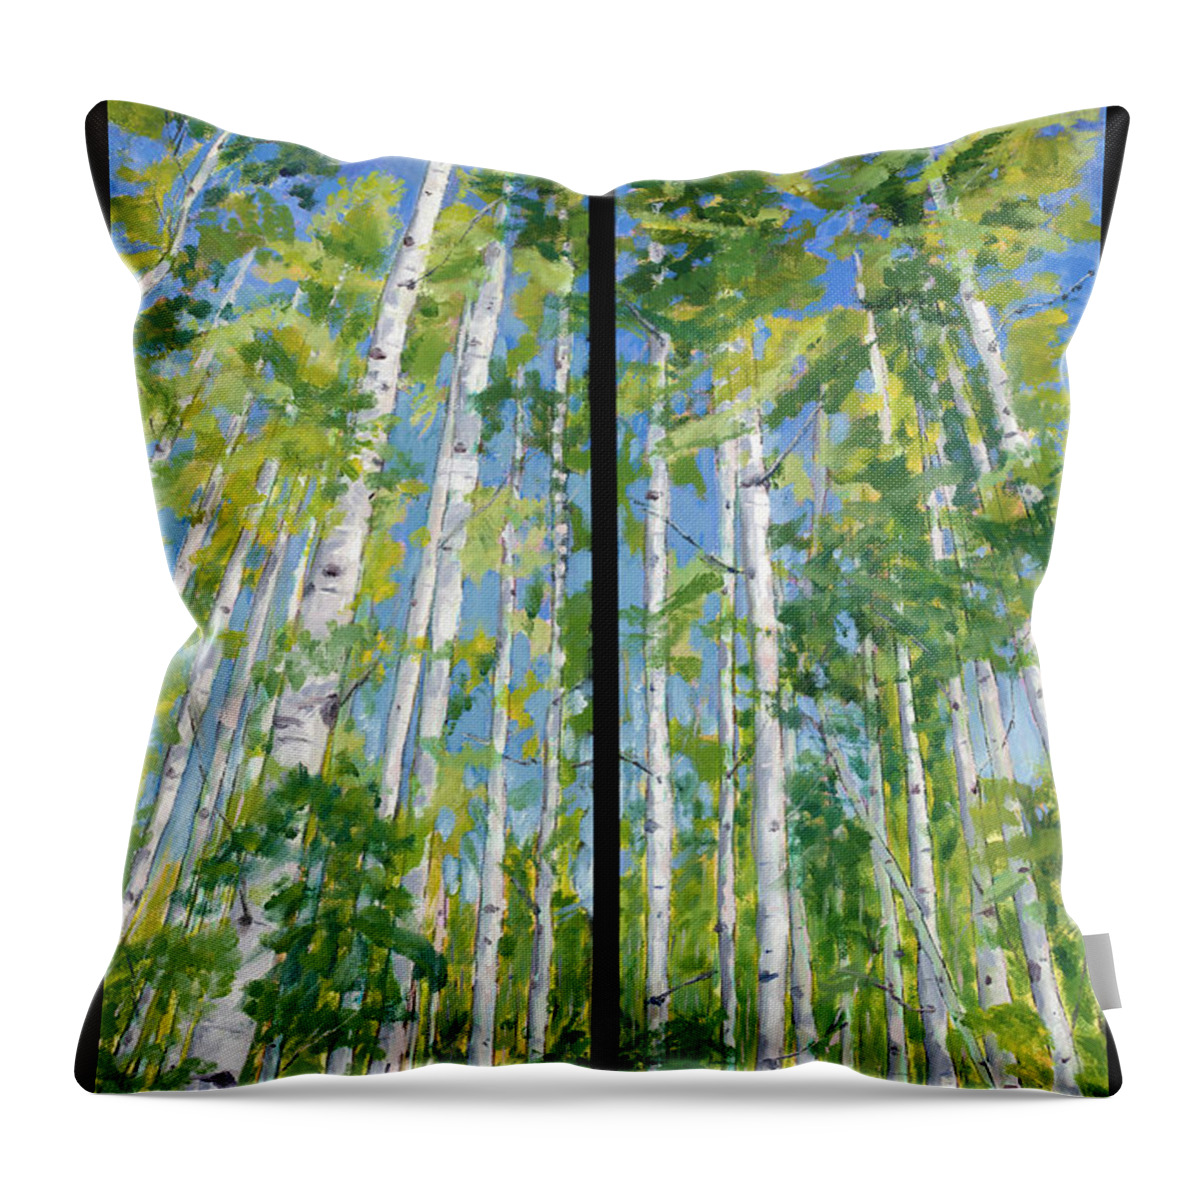 Diptych Throw Pillow featuring the painting Aspen Twin Perspectives by Mary Benke